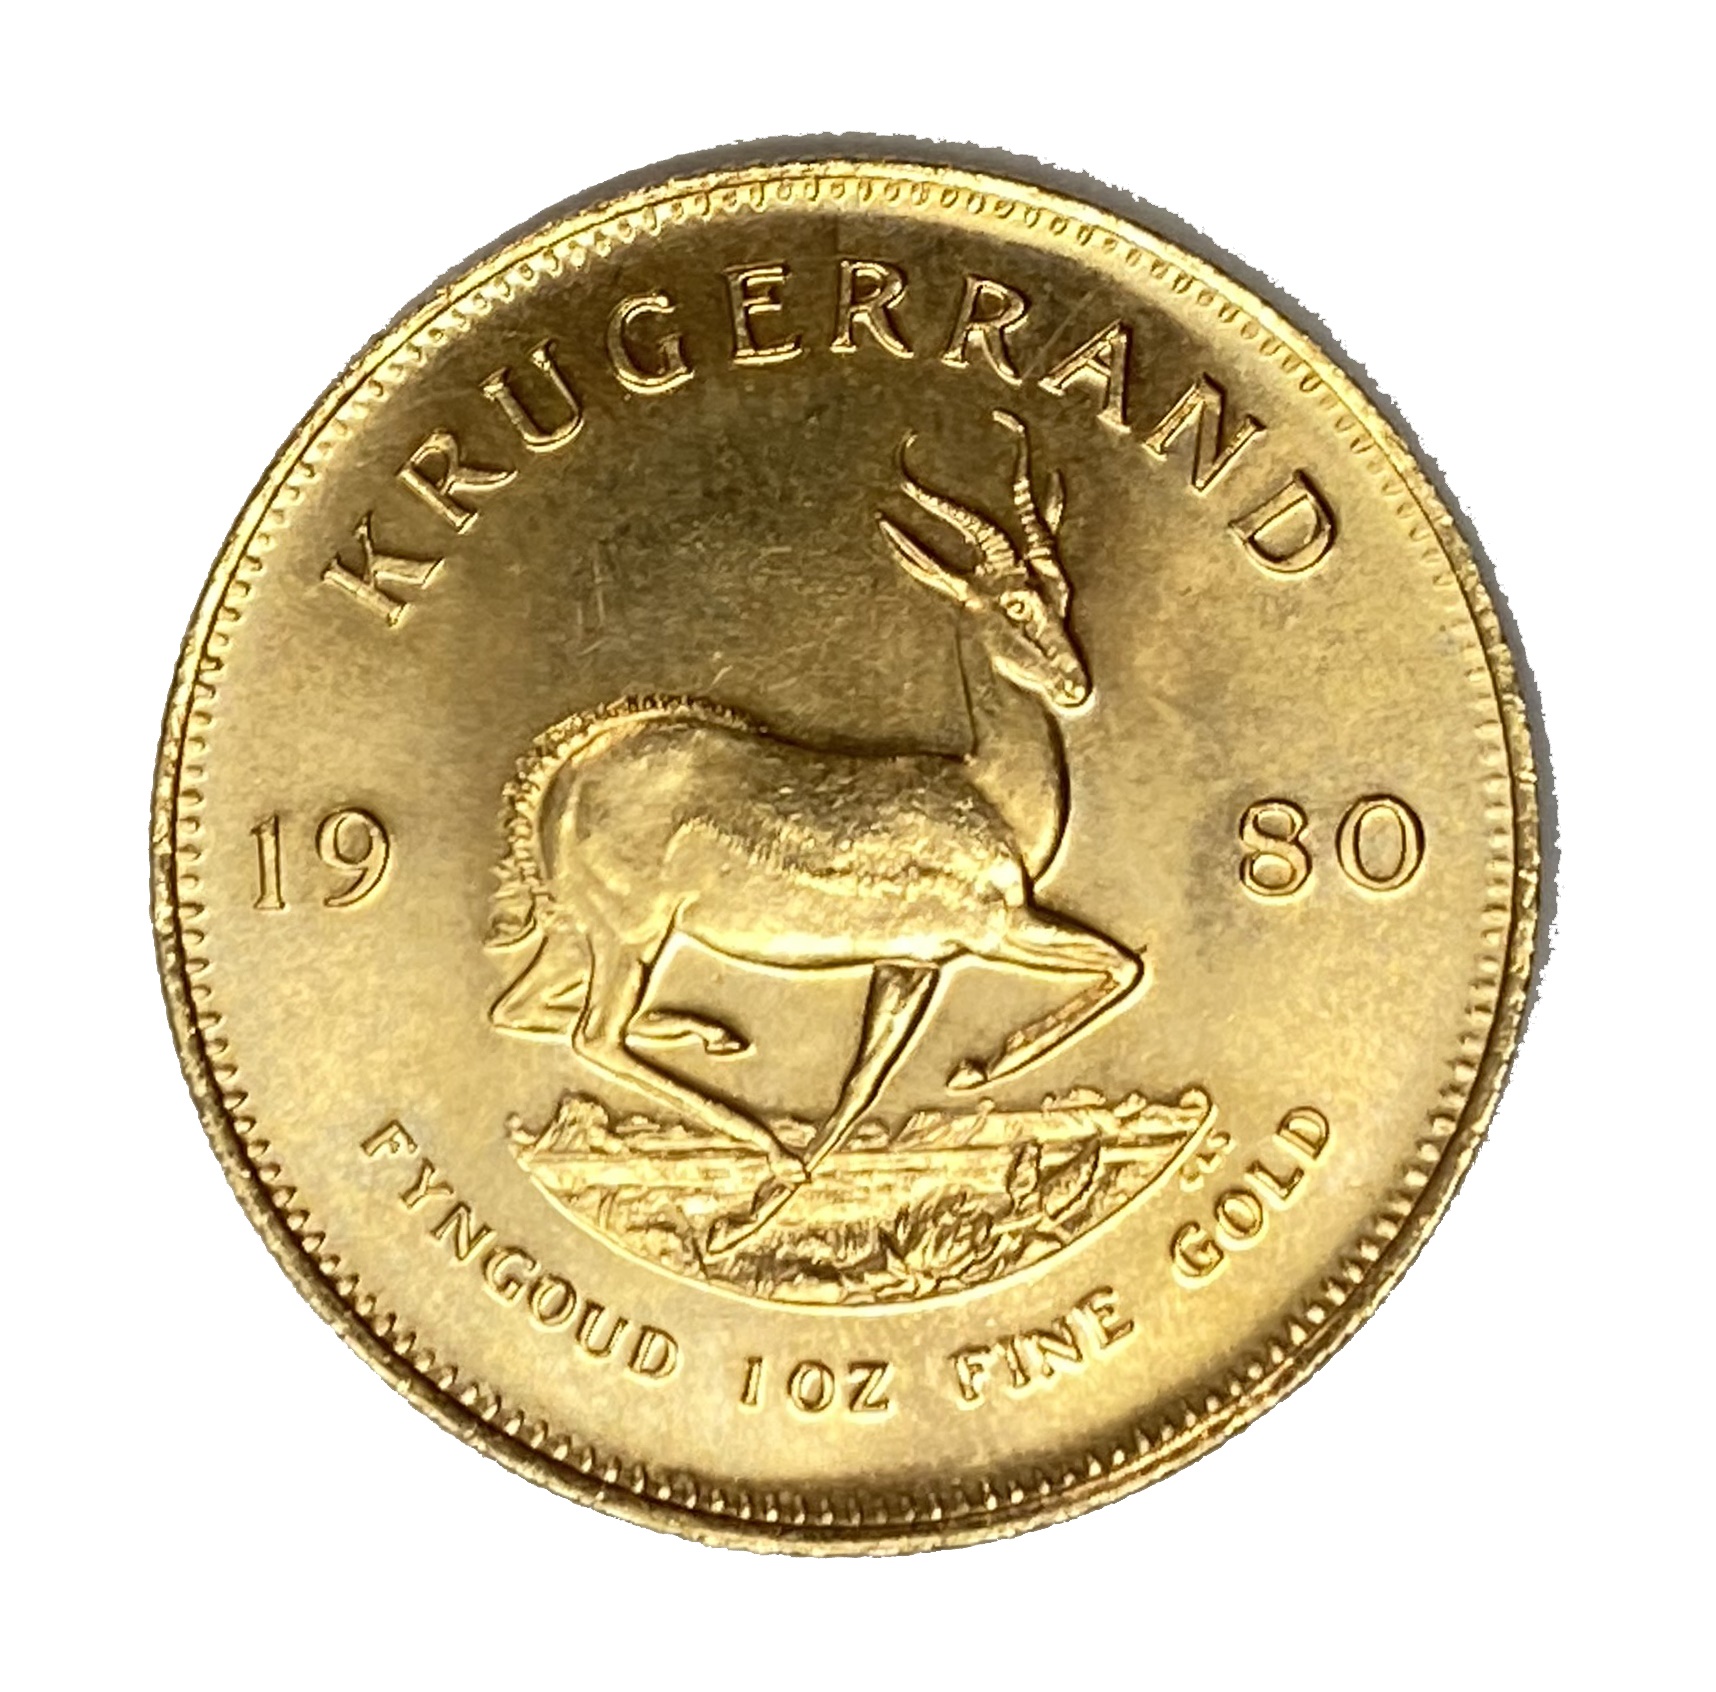 South Africa, gold Krugerrand coin, 1980 - Image 2 of 2